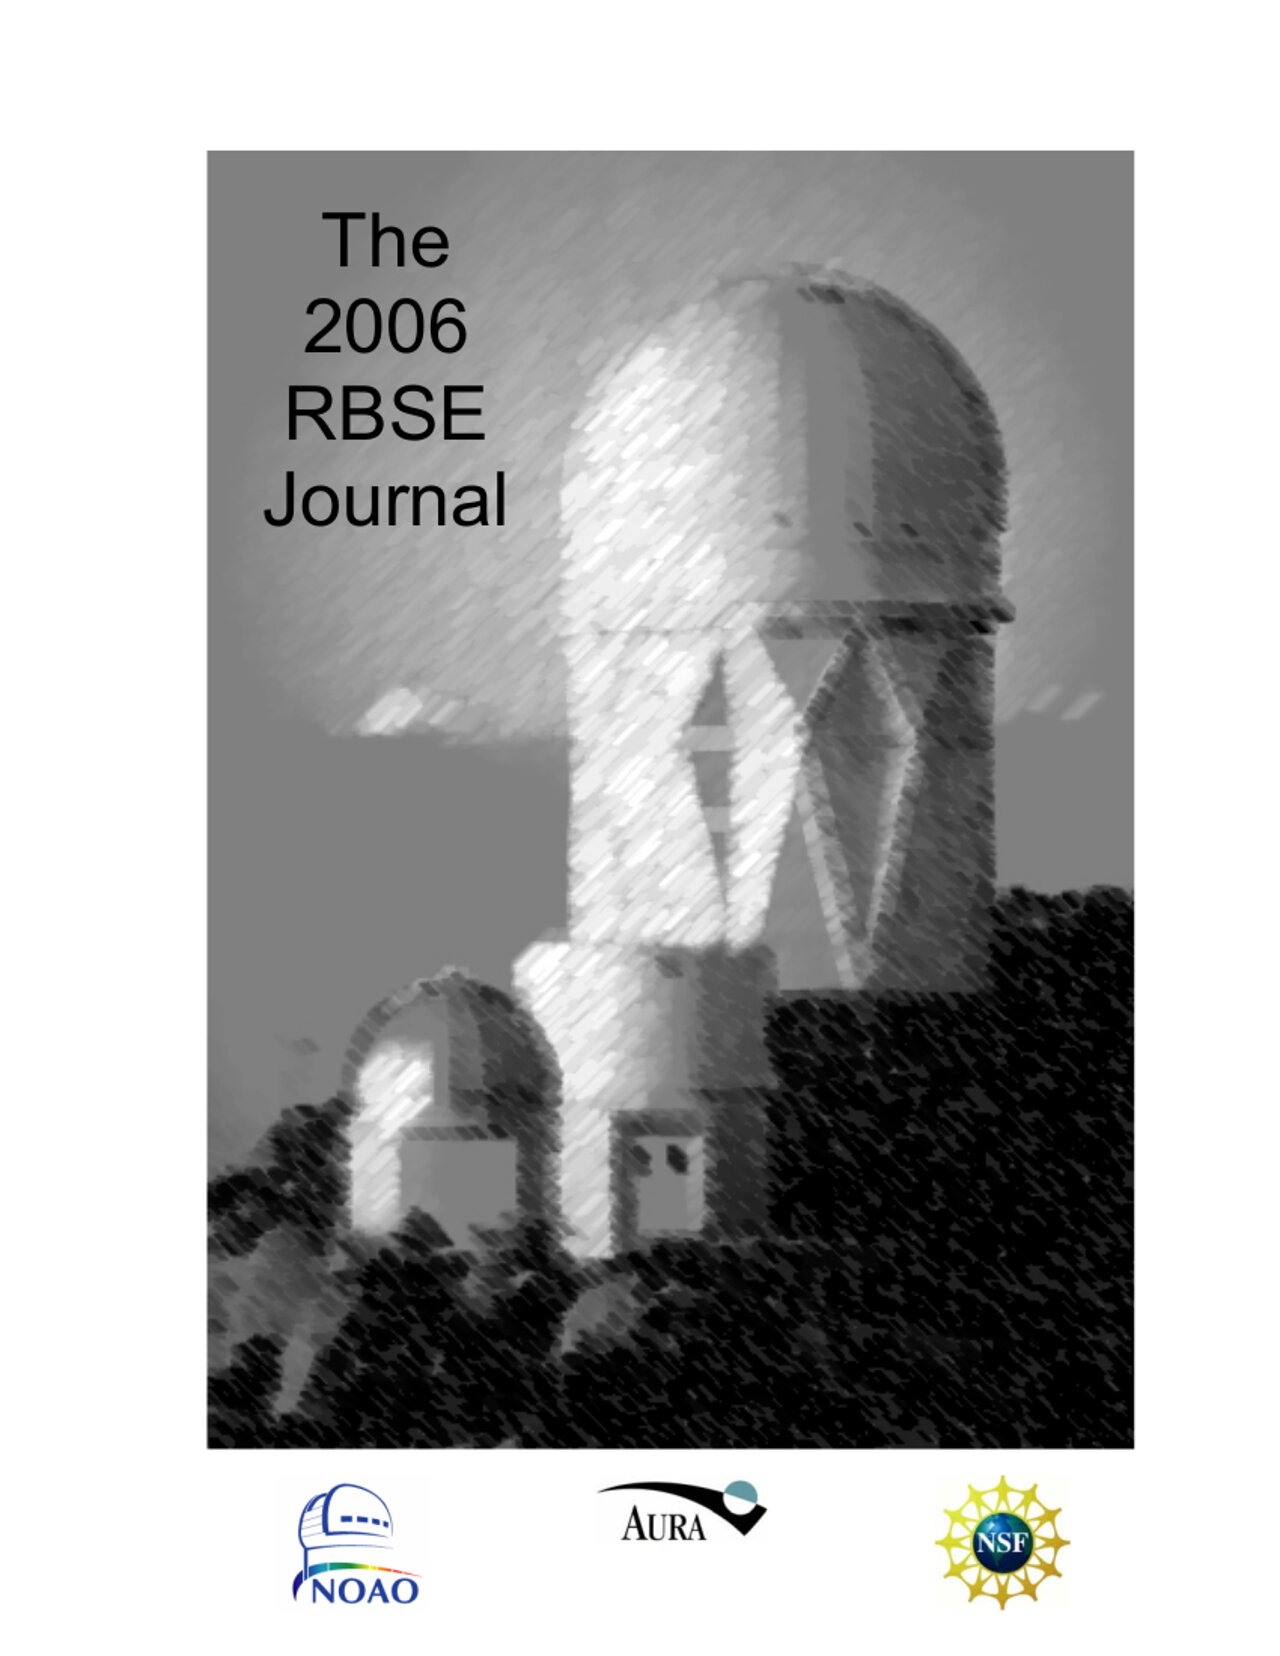 The RBSE Journal 2006